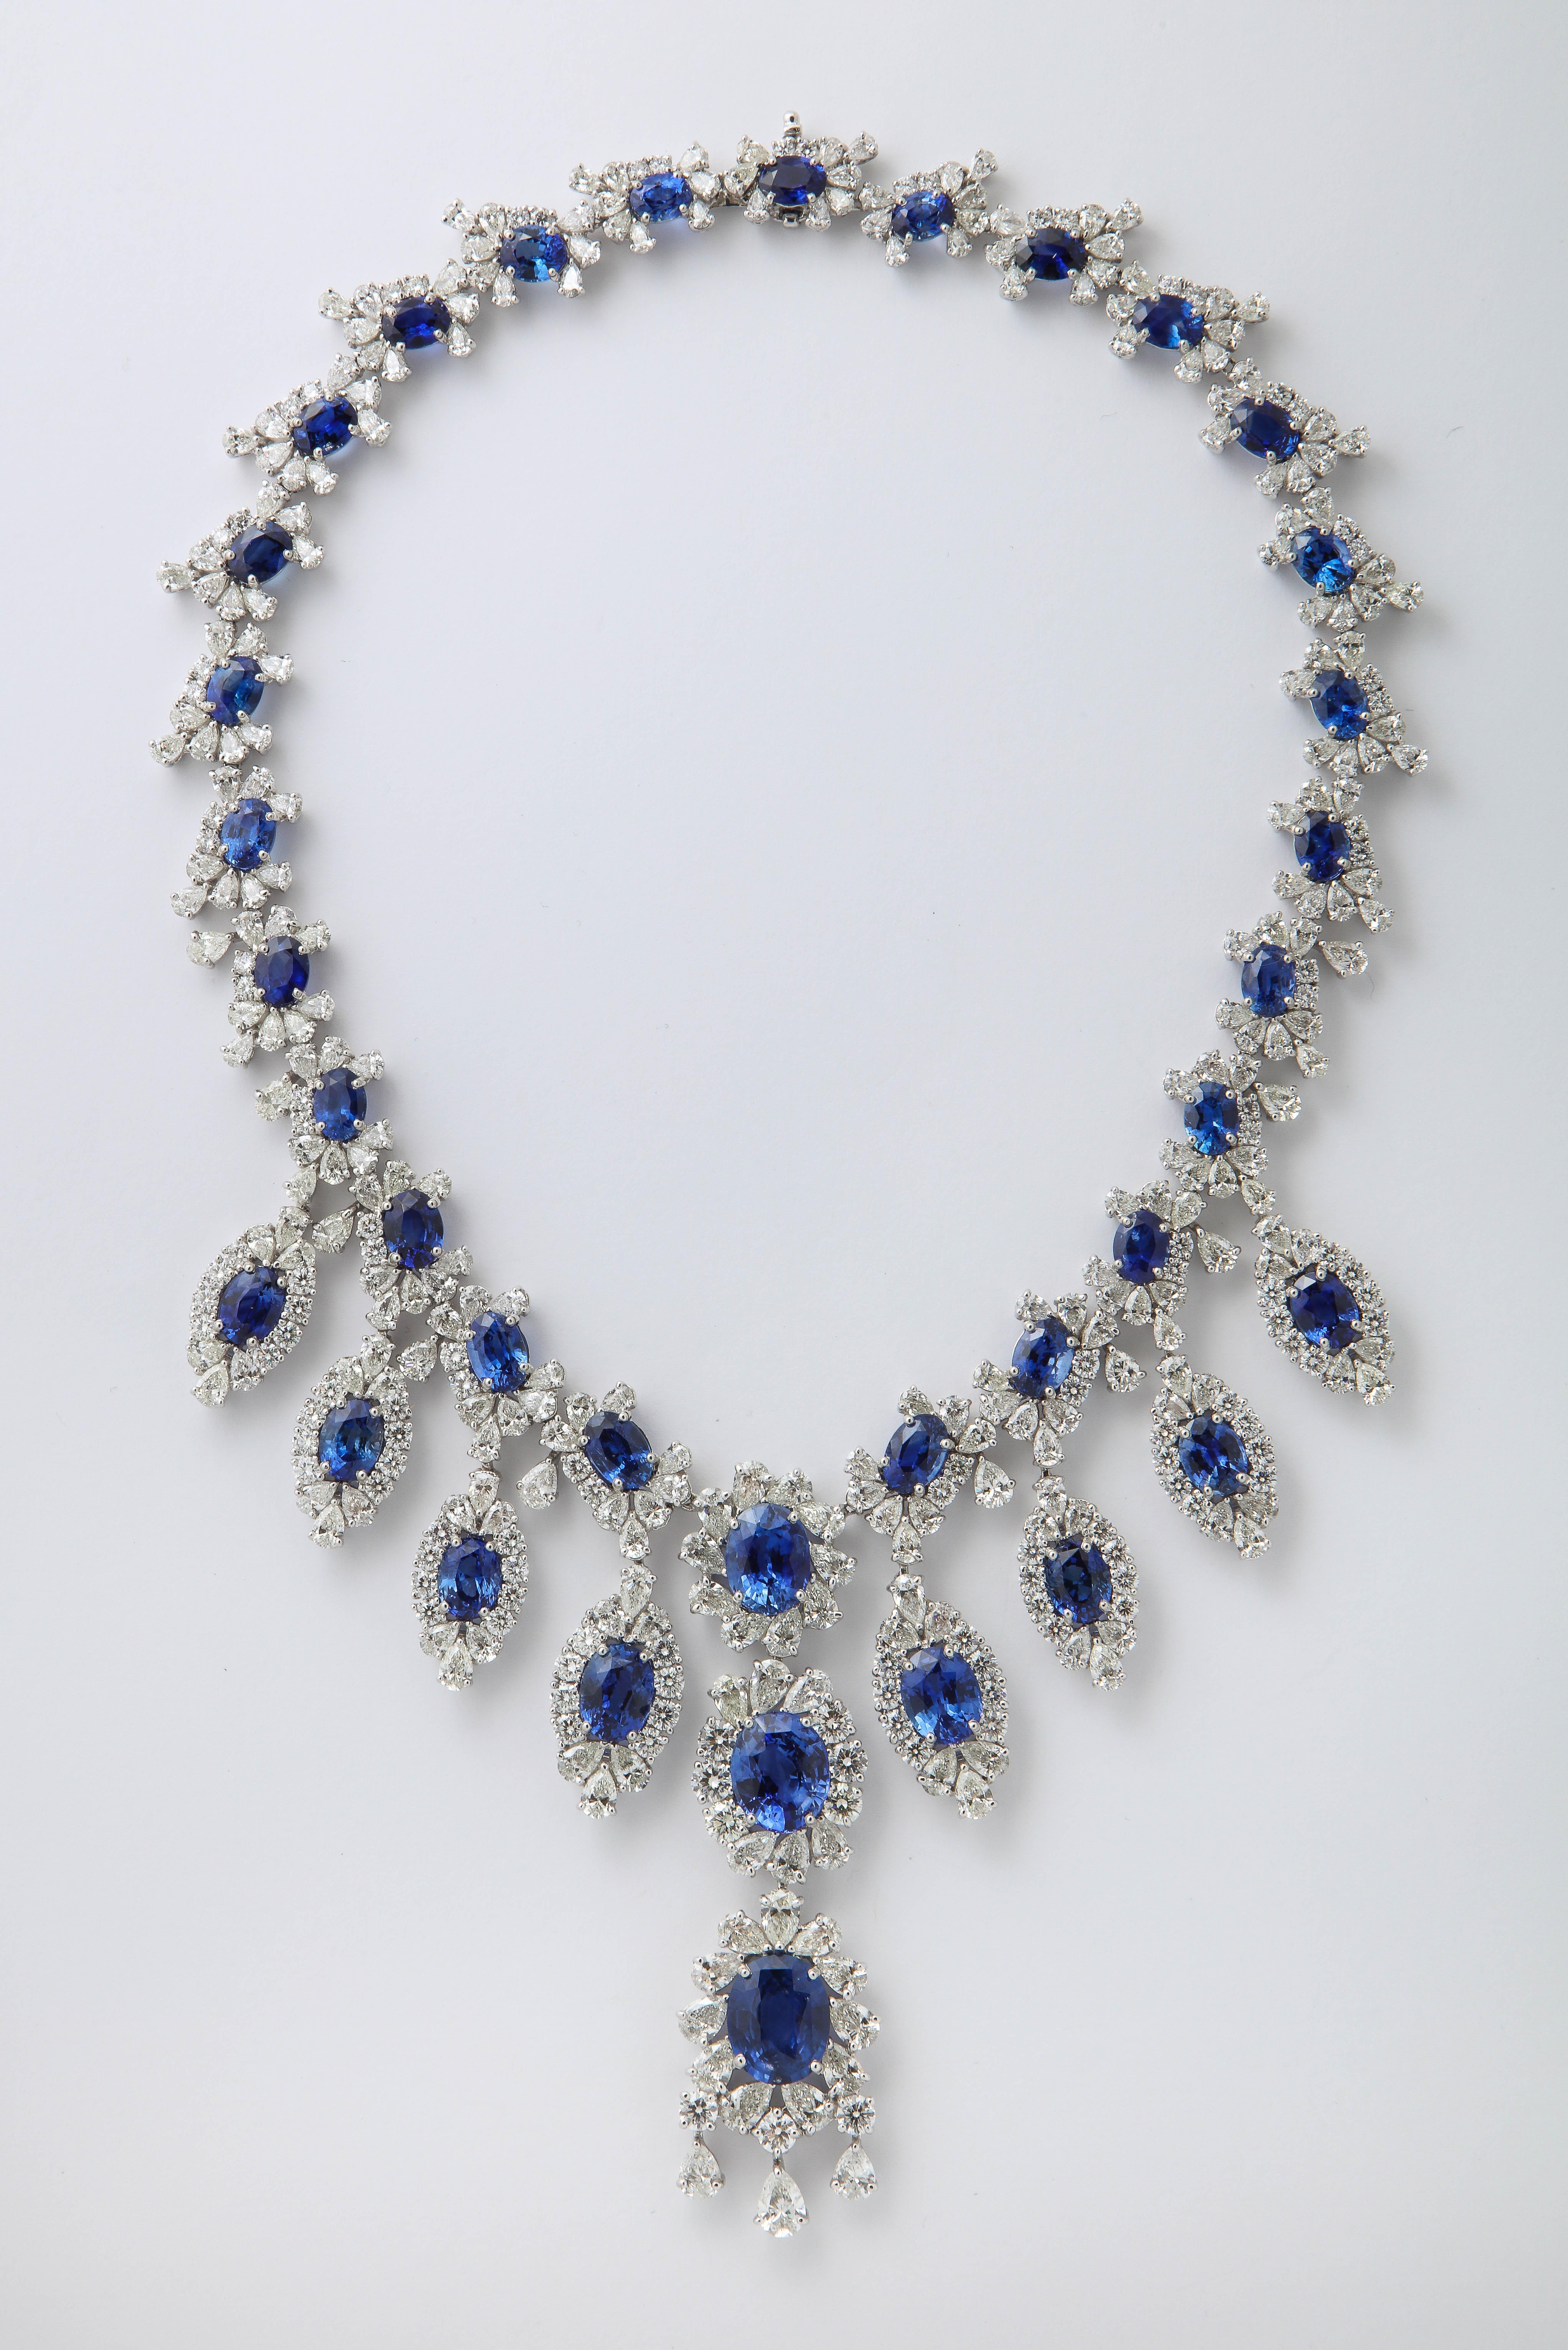 
An grand and important sapphire and diamond earring and necklace set. 

116.50 carats of vivid blue to blue Ceylon Sapphires.

91.19 carats of white round brilliant cut and pear shaped diamonds. 

Set in Platinum 

Certified by Christian Dunaigre